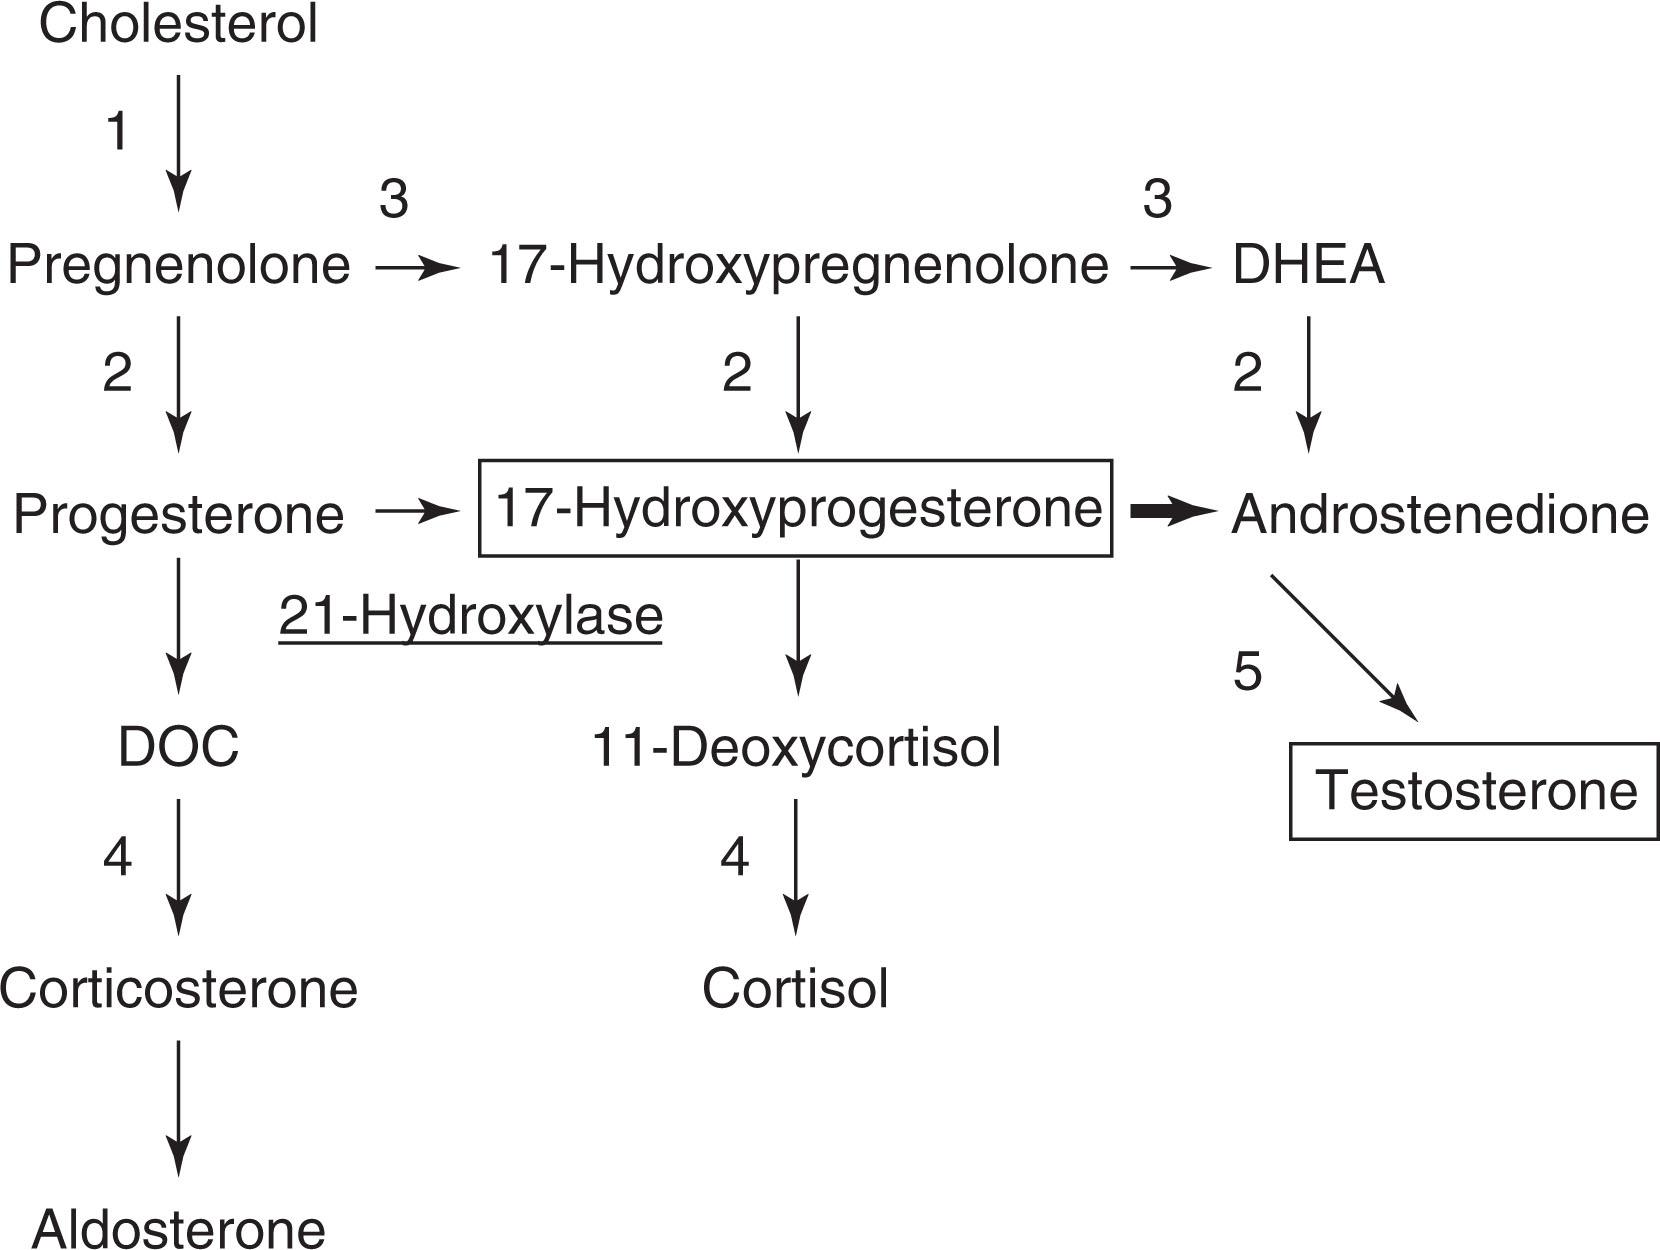 Fig. 85.13, Steroid biosynthetic pathway demonstrating the defect in 21-hydroxylase deficiency (solid bars) and accumulated precursor 17-hydroxyprogesterone. Note the increased shunting into androgen-producing pathways. Steroidogenic enzymes are indicated as follows: ( 1 ) steroidogenic acute regulatory protein and side chain cleavage, ( 2 ) 3β-hydroxysteroid dehydrogenase, ( 3 ) 17α-hydroxylase/17,20-lyase, ( 4 ) 11β-hydroxylase, and ( 5 ) 17β-hydroxysteroid dehydrogenase. DHEA , Dehydroxyepiandrosterone; DOC , deoxycorticosterone.